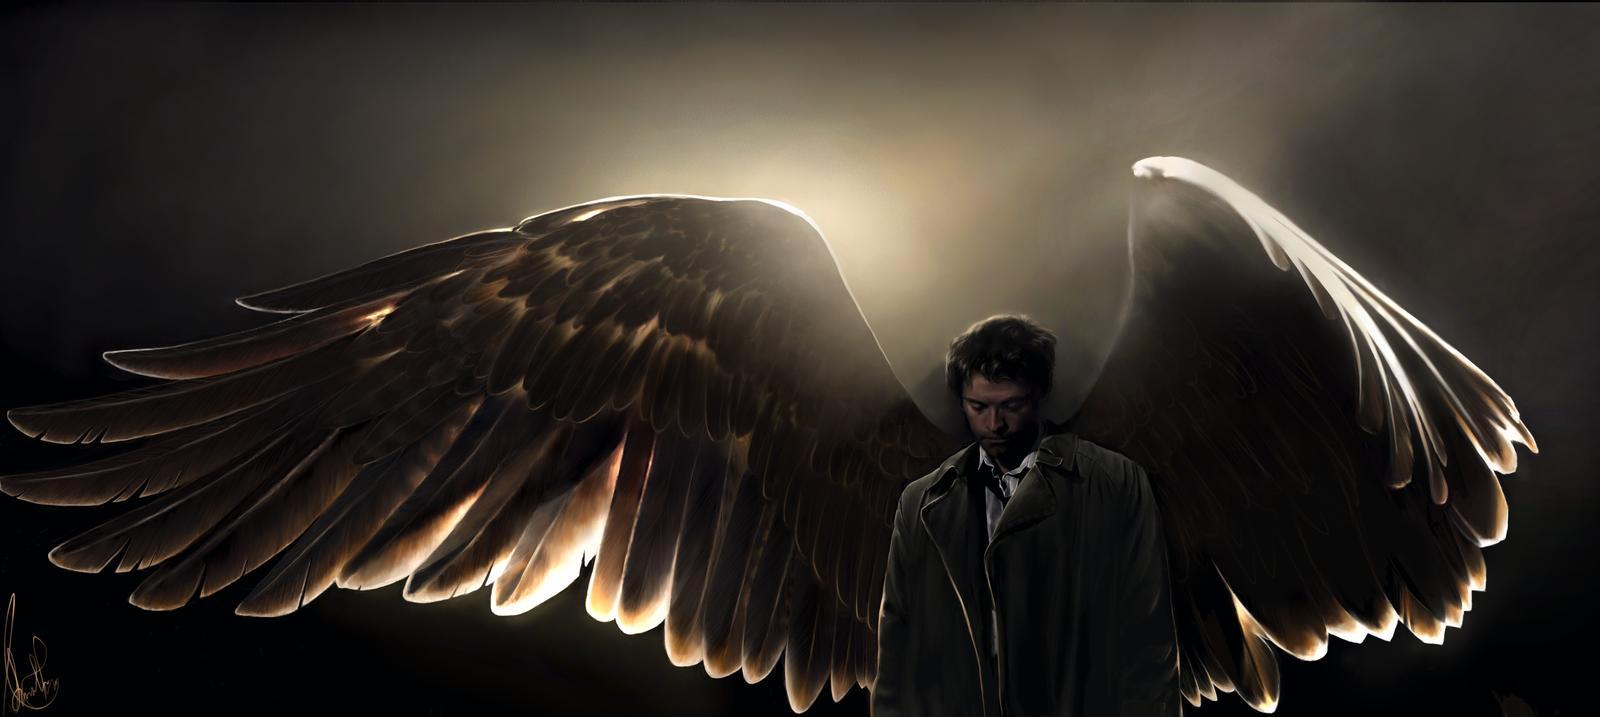 Supernatural Castiel With Wings Wallpaper Gallery